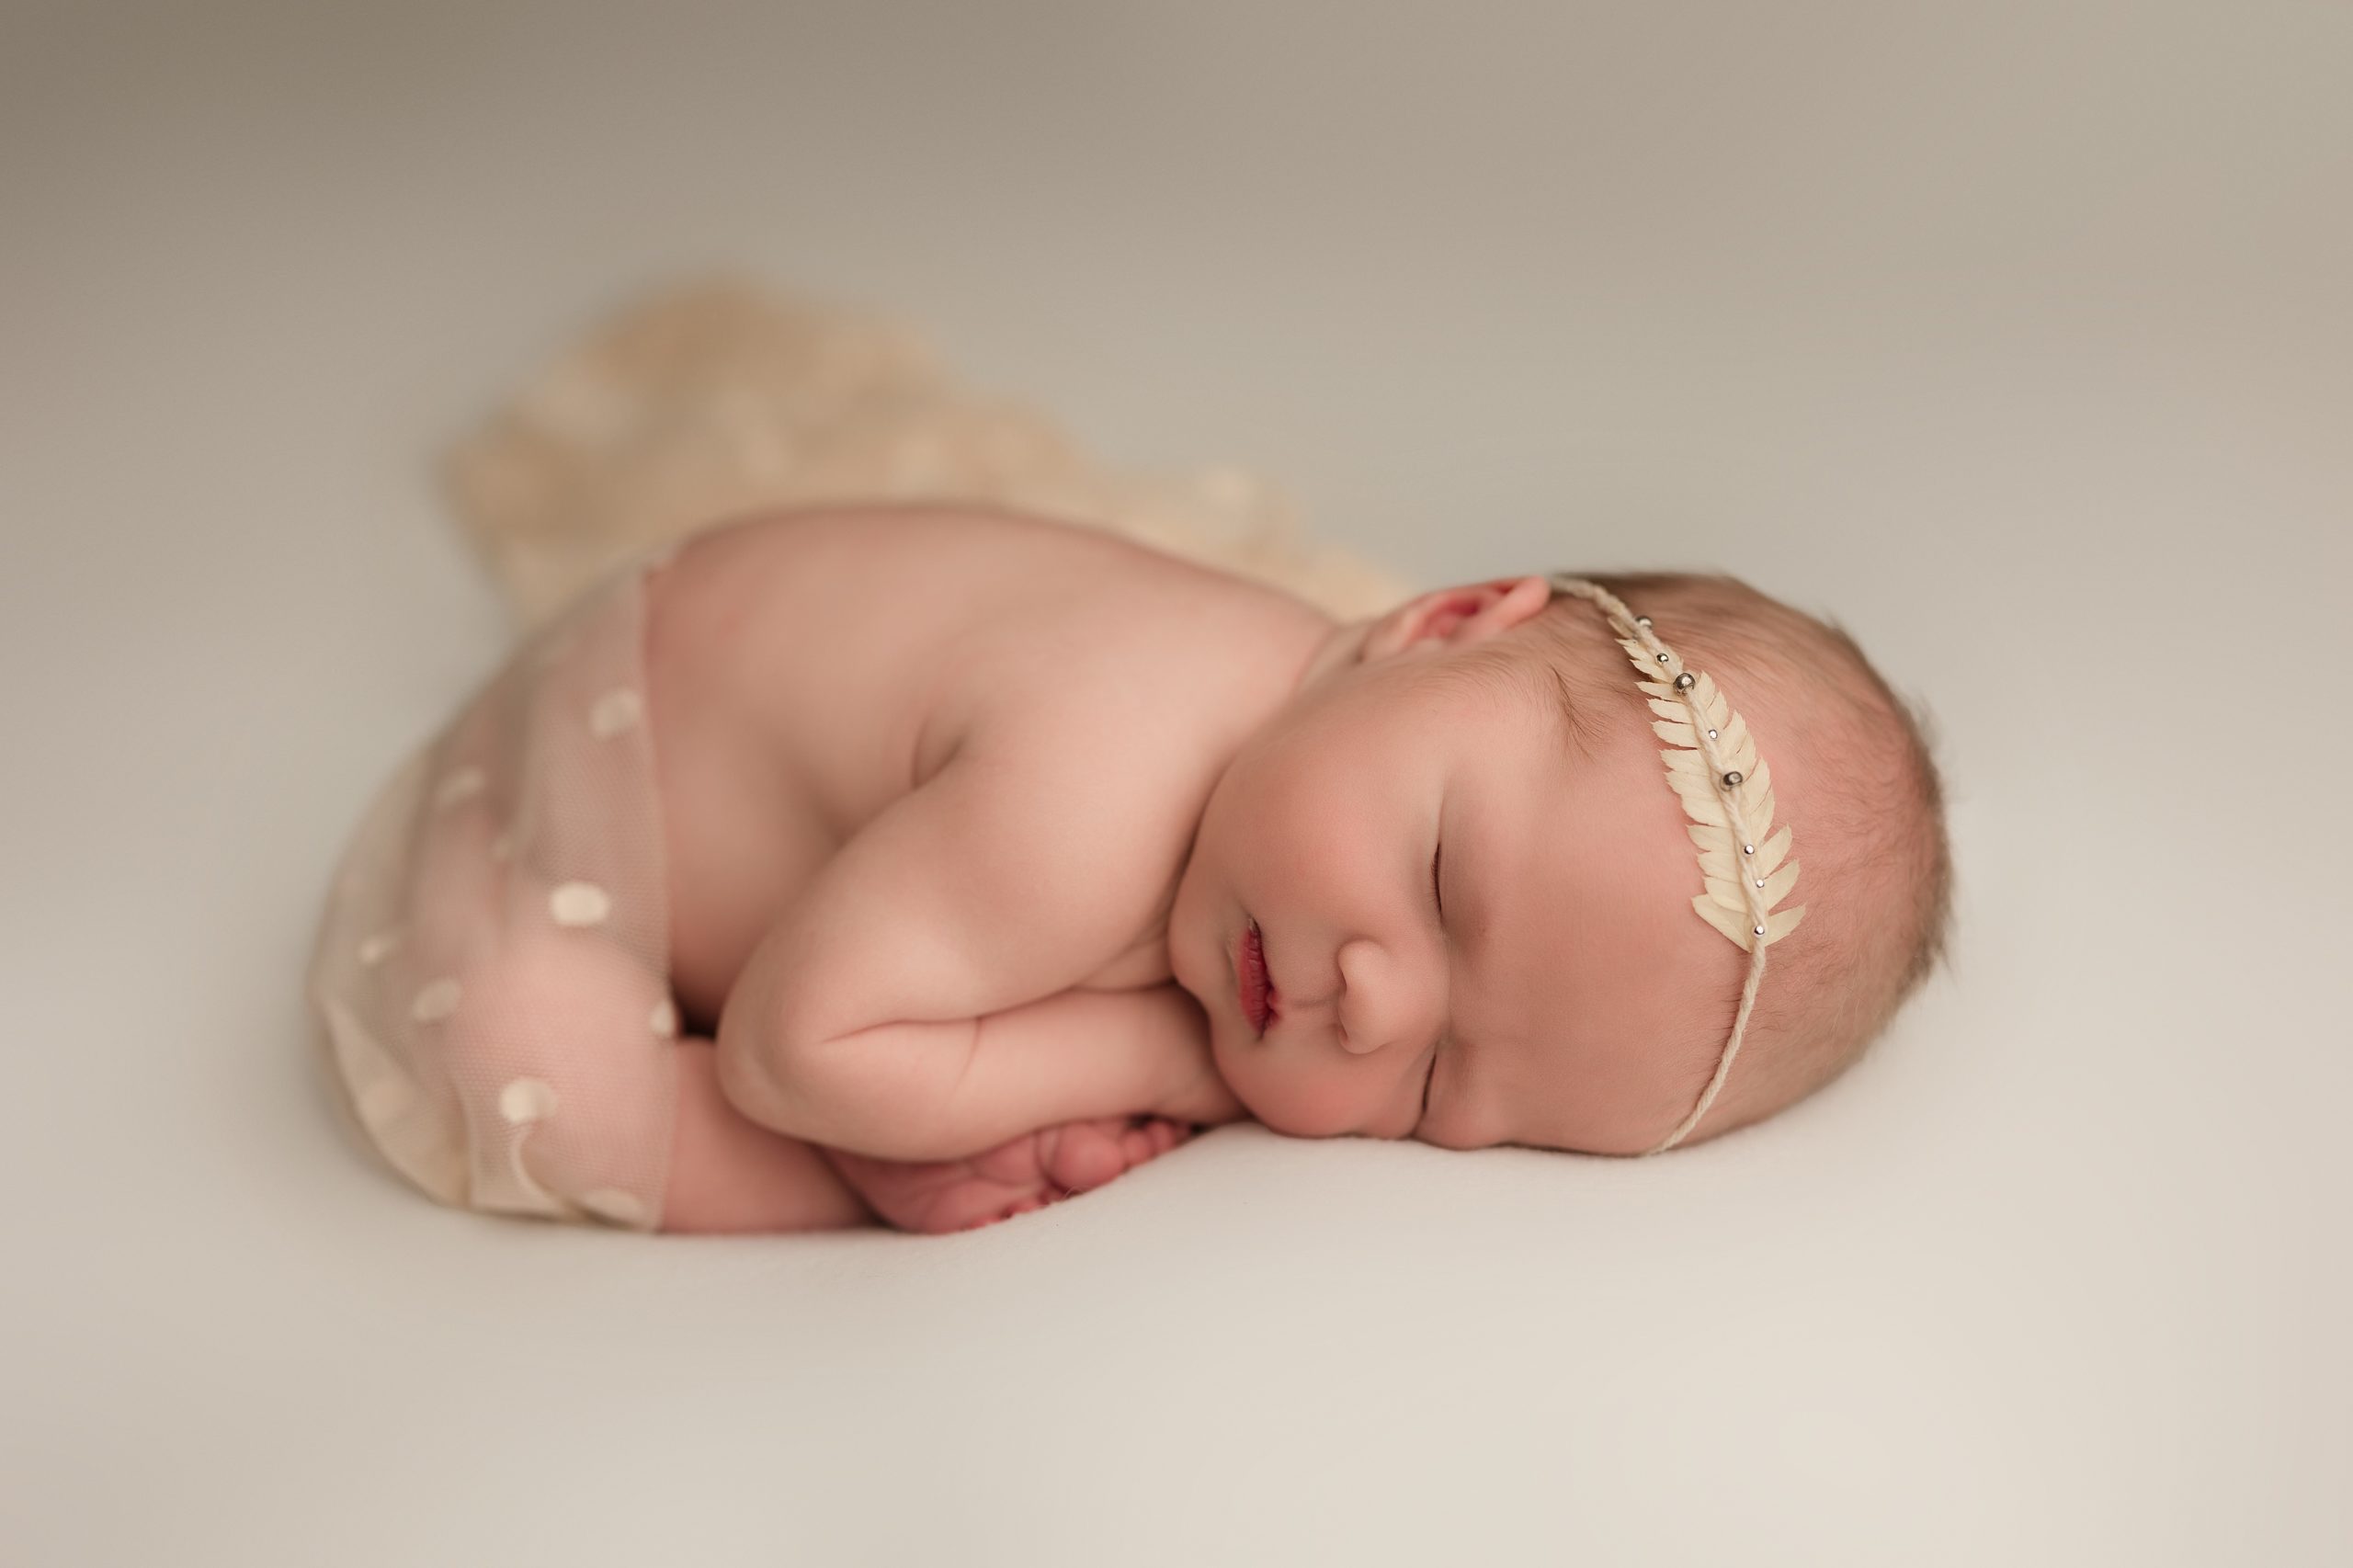 newborn baby girl curled up with toes peeking out and a dotted wrap covering her